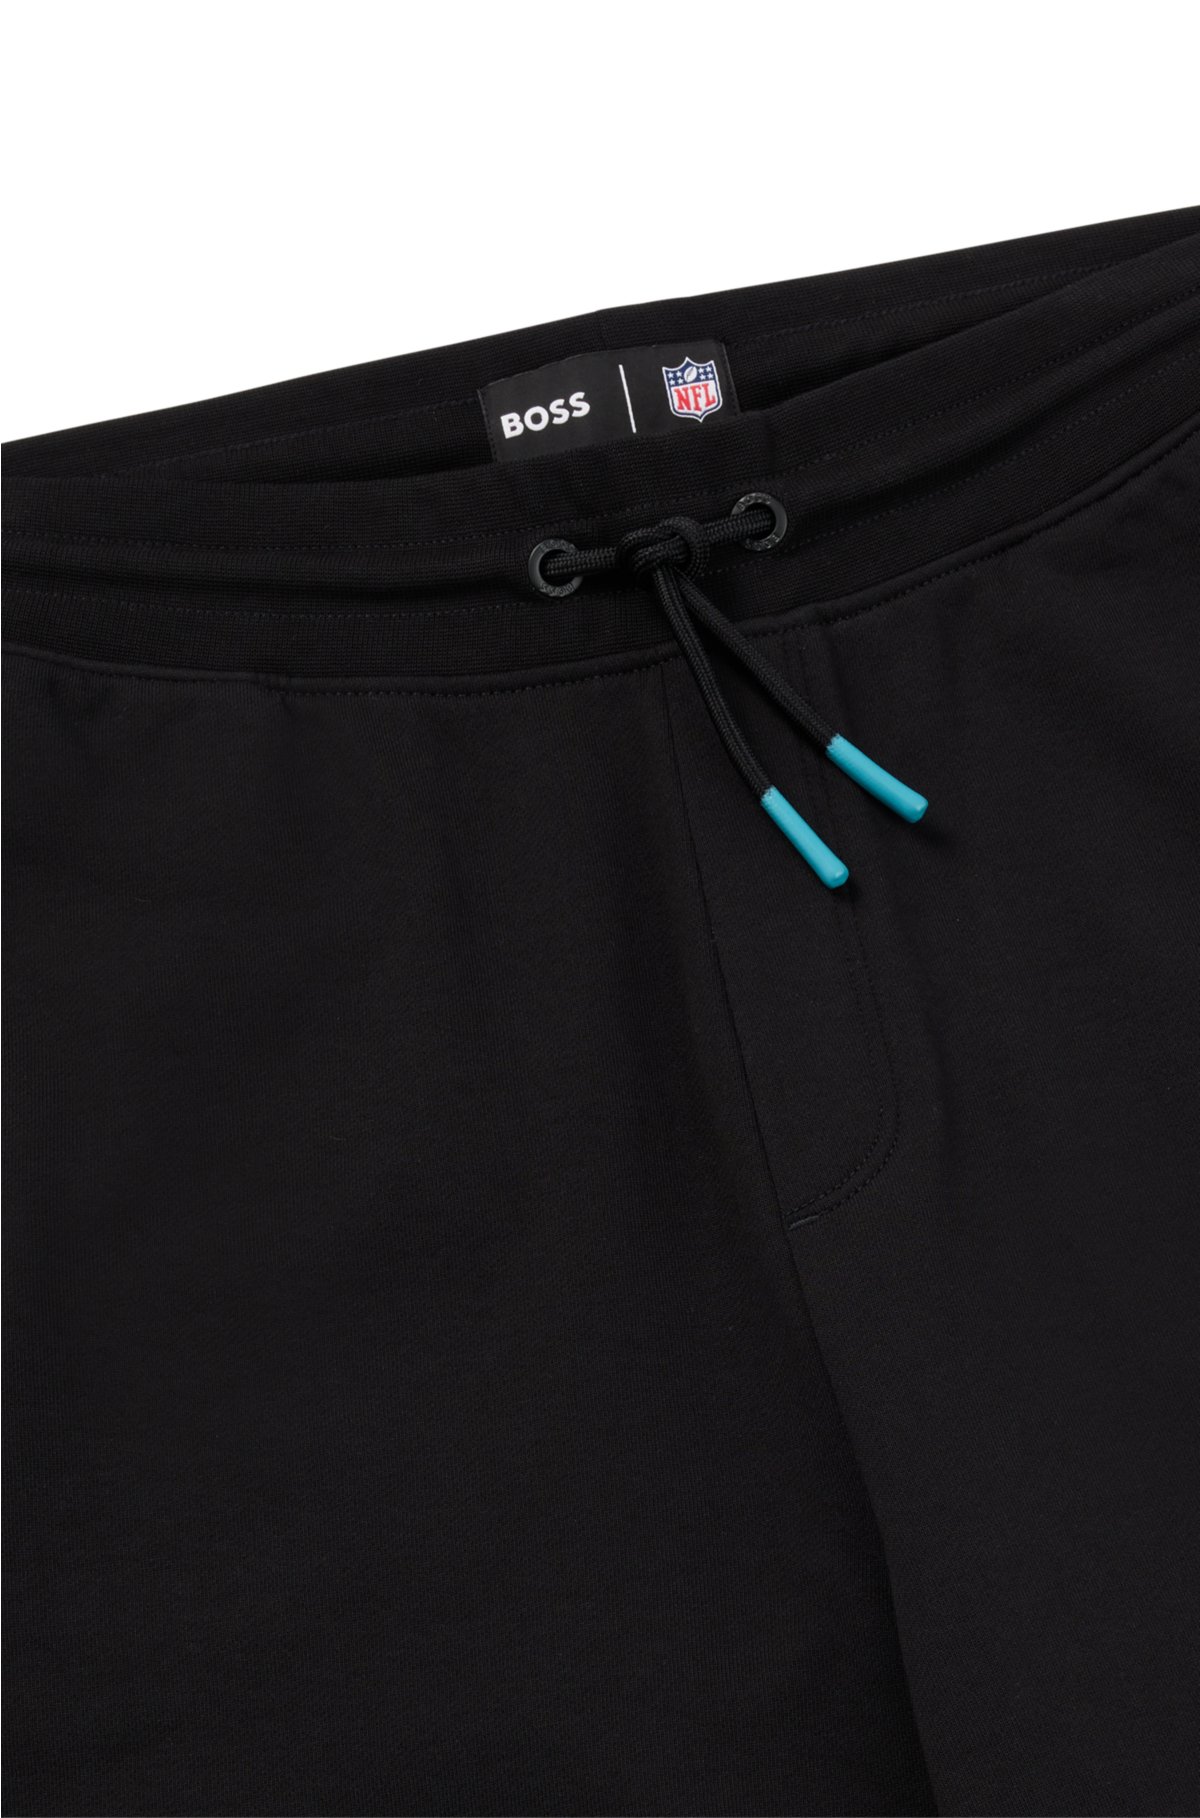 BOSS x NFL cotton-terry shorts with collaborative branding, Dolphins